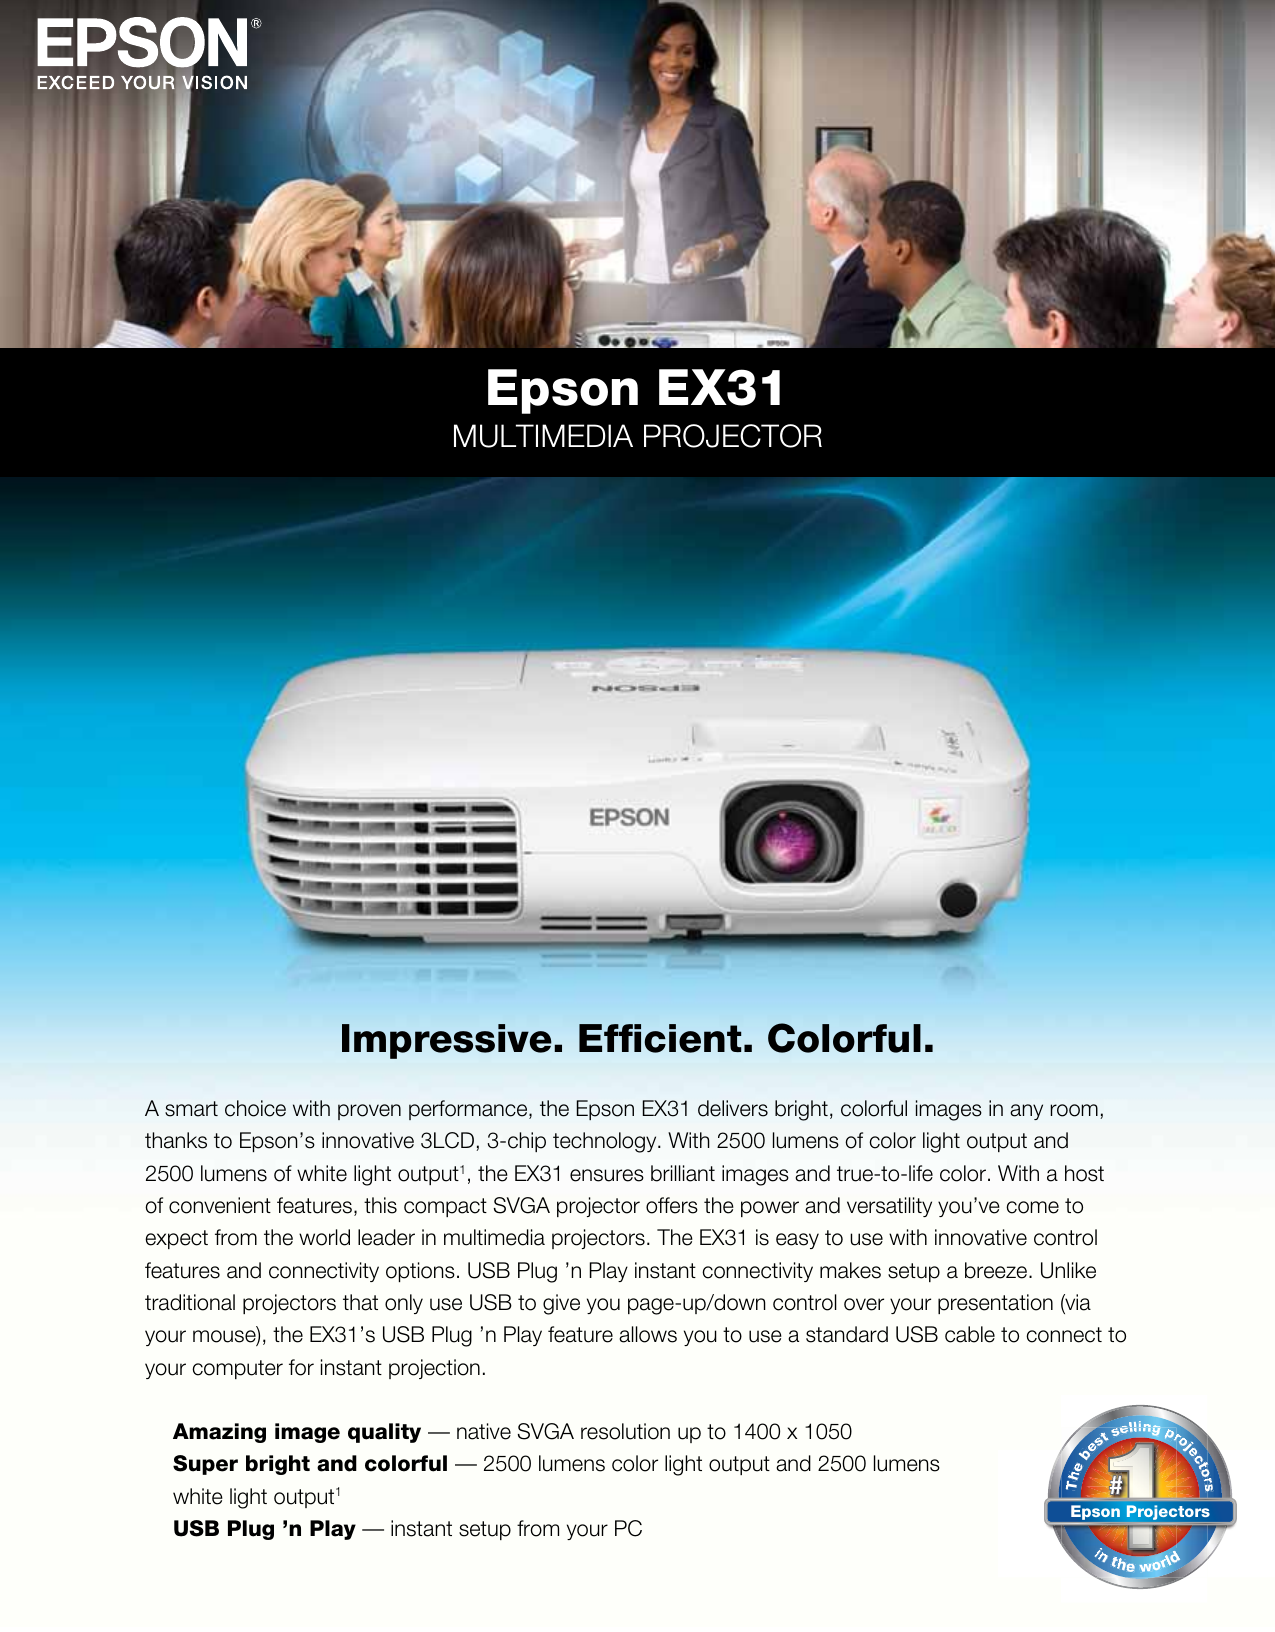 Page 1 of 4 - Epson Epson-Ex31-Multimedia-Projector-Product-Brochure- EX31 - Product Brochure  Epson-ex31-multimedia-projector-product-brochure